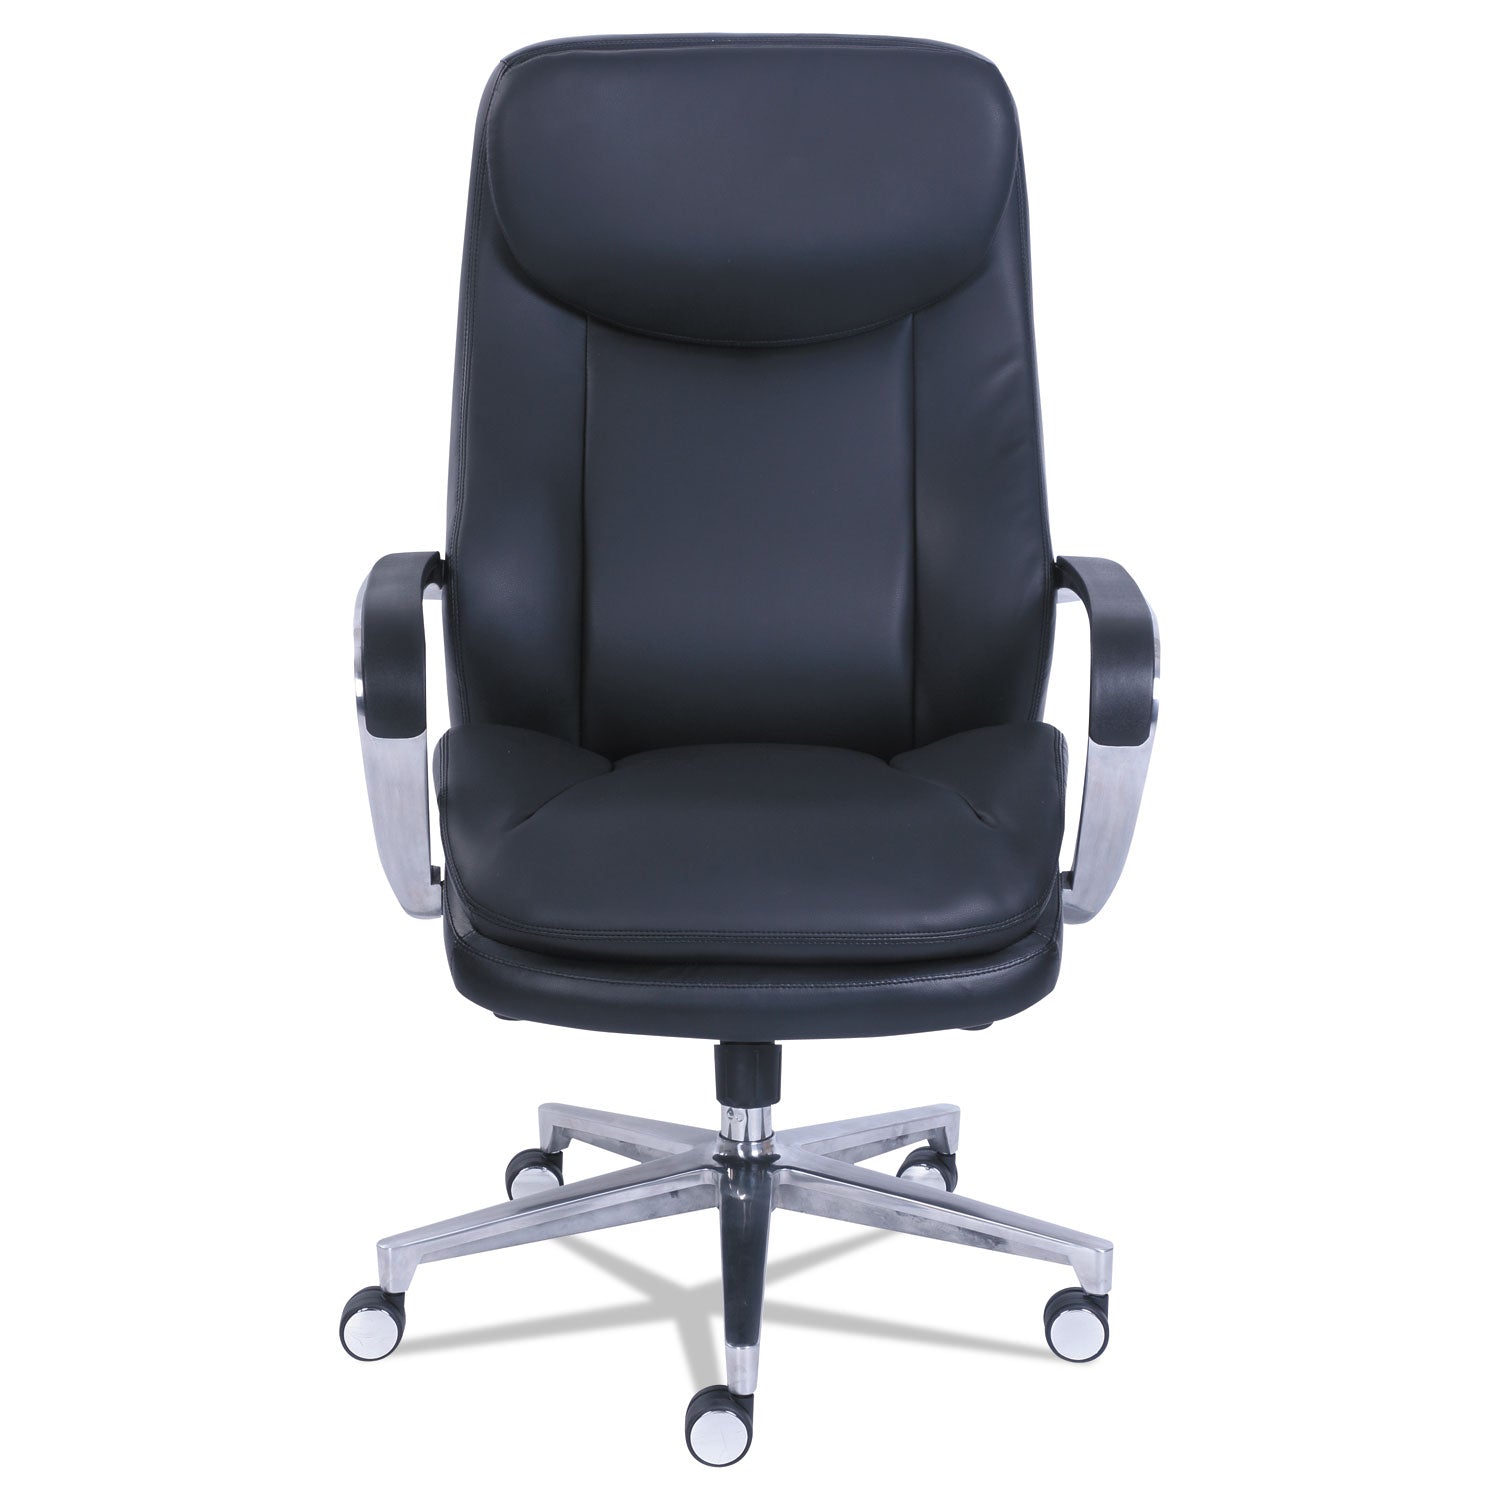 commercial-2000-high-back-executive-chair-supports-up-to-300-lb-2025-to-2325-seat-height-black-seat-back-silver-base_lzb48958 - 2